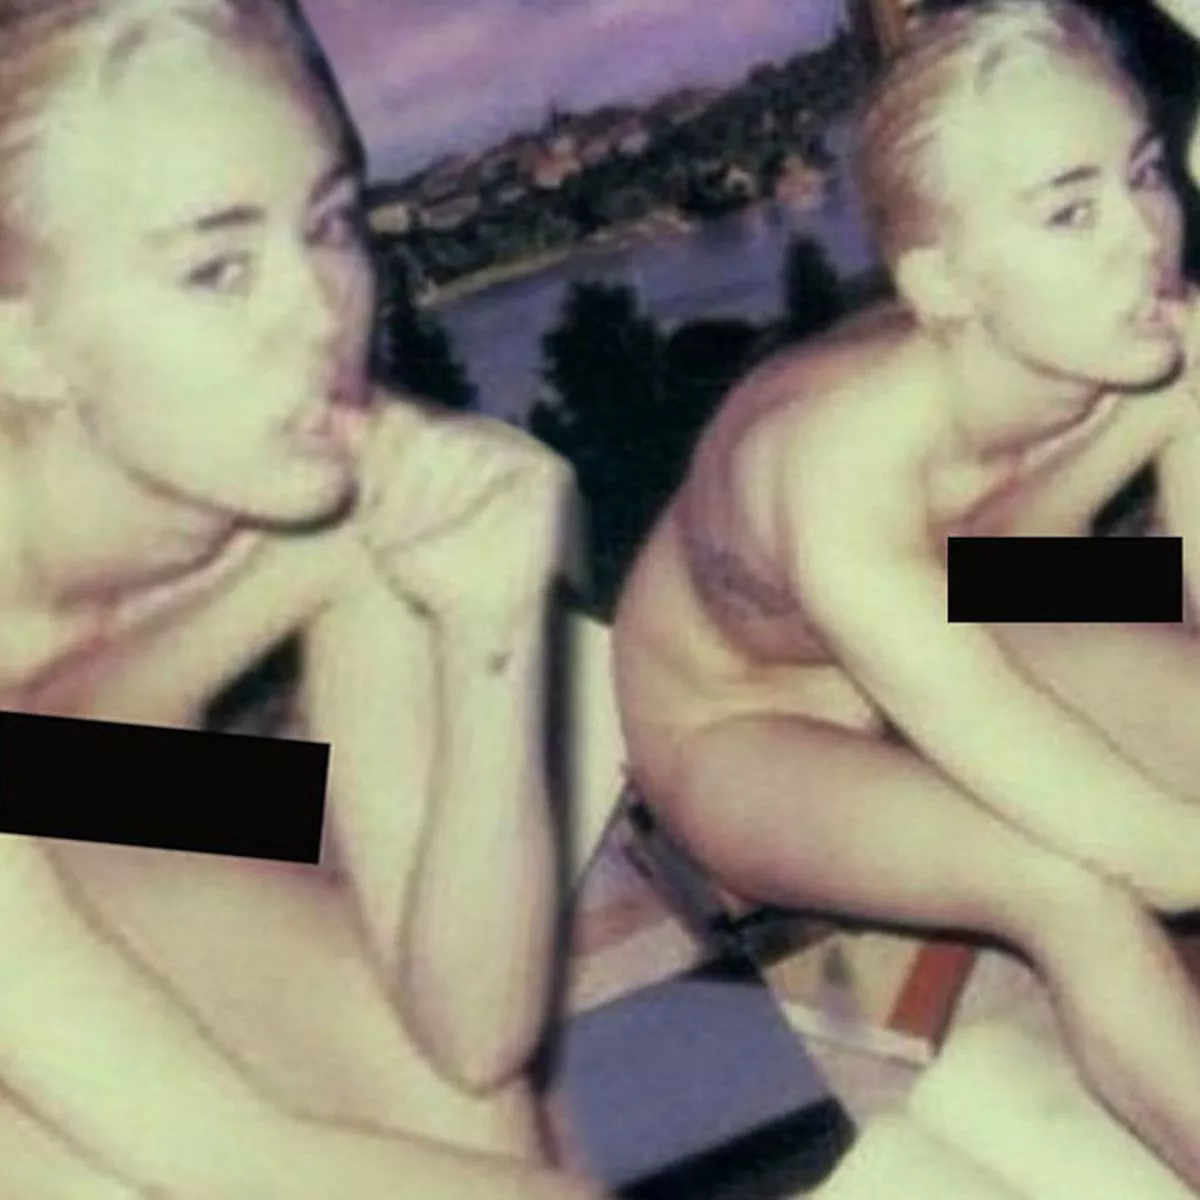 adam scholz recommends miley cyrus backstage sextape pic